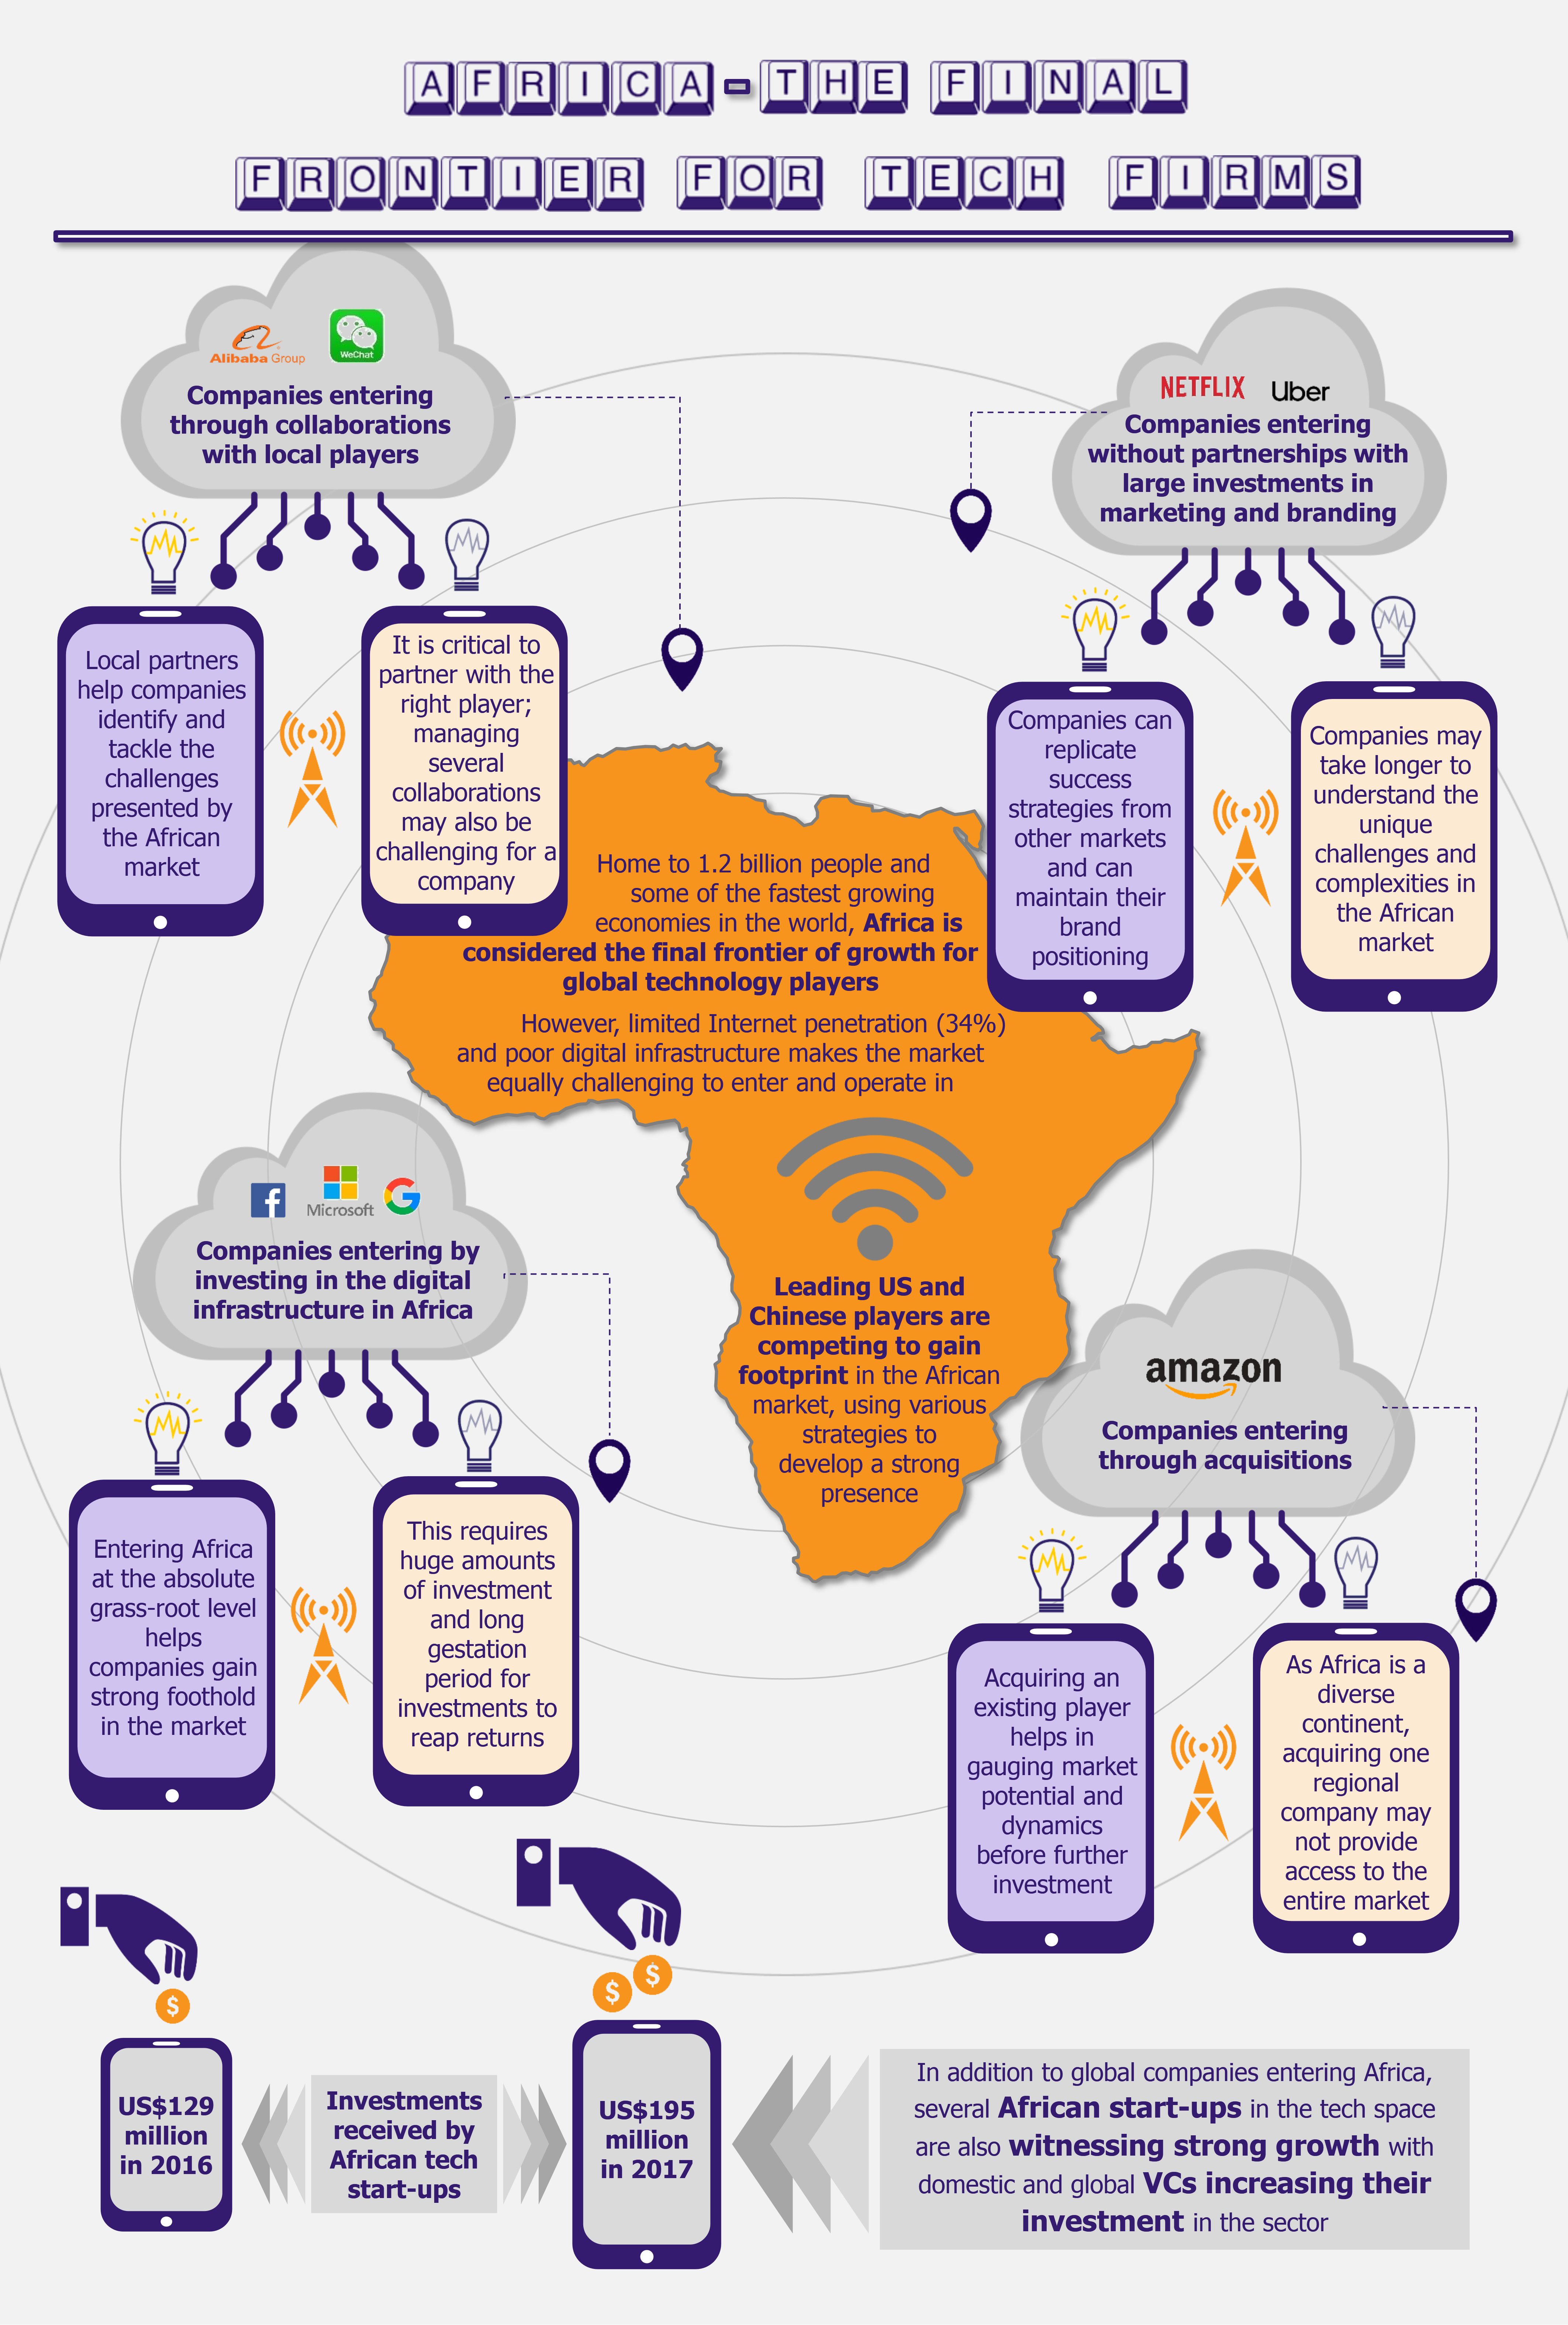 Connecting Africa – Global Technology Firms Gaining a Foothold in the Market